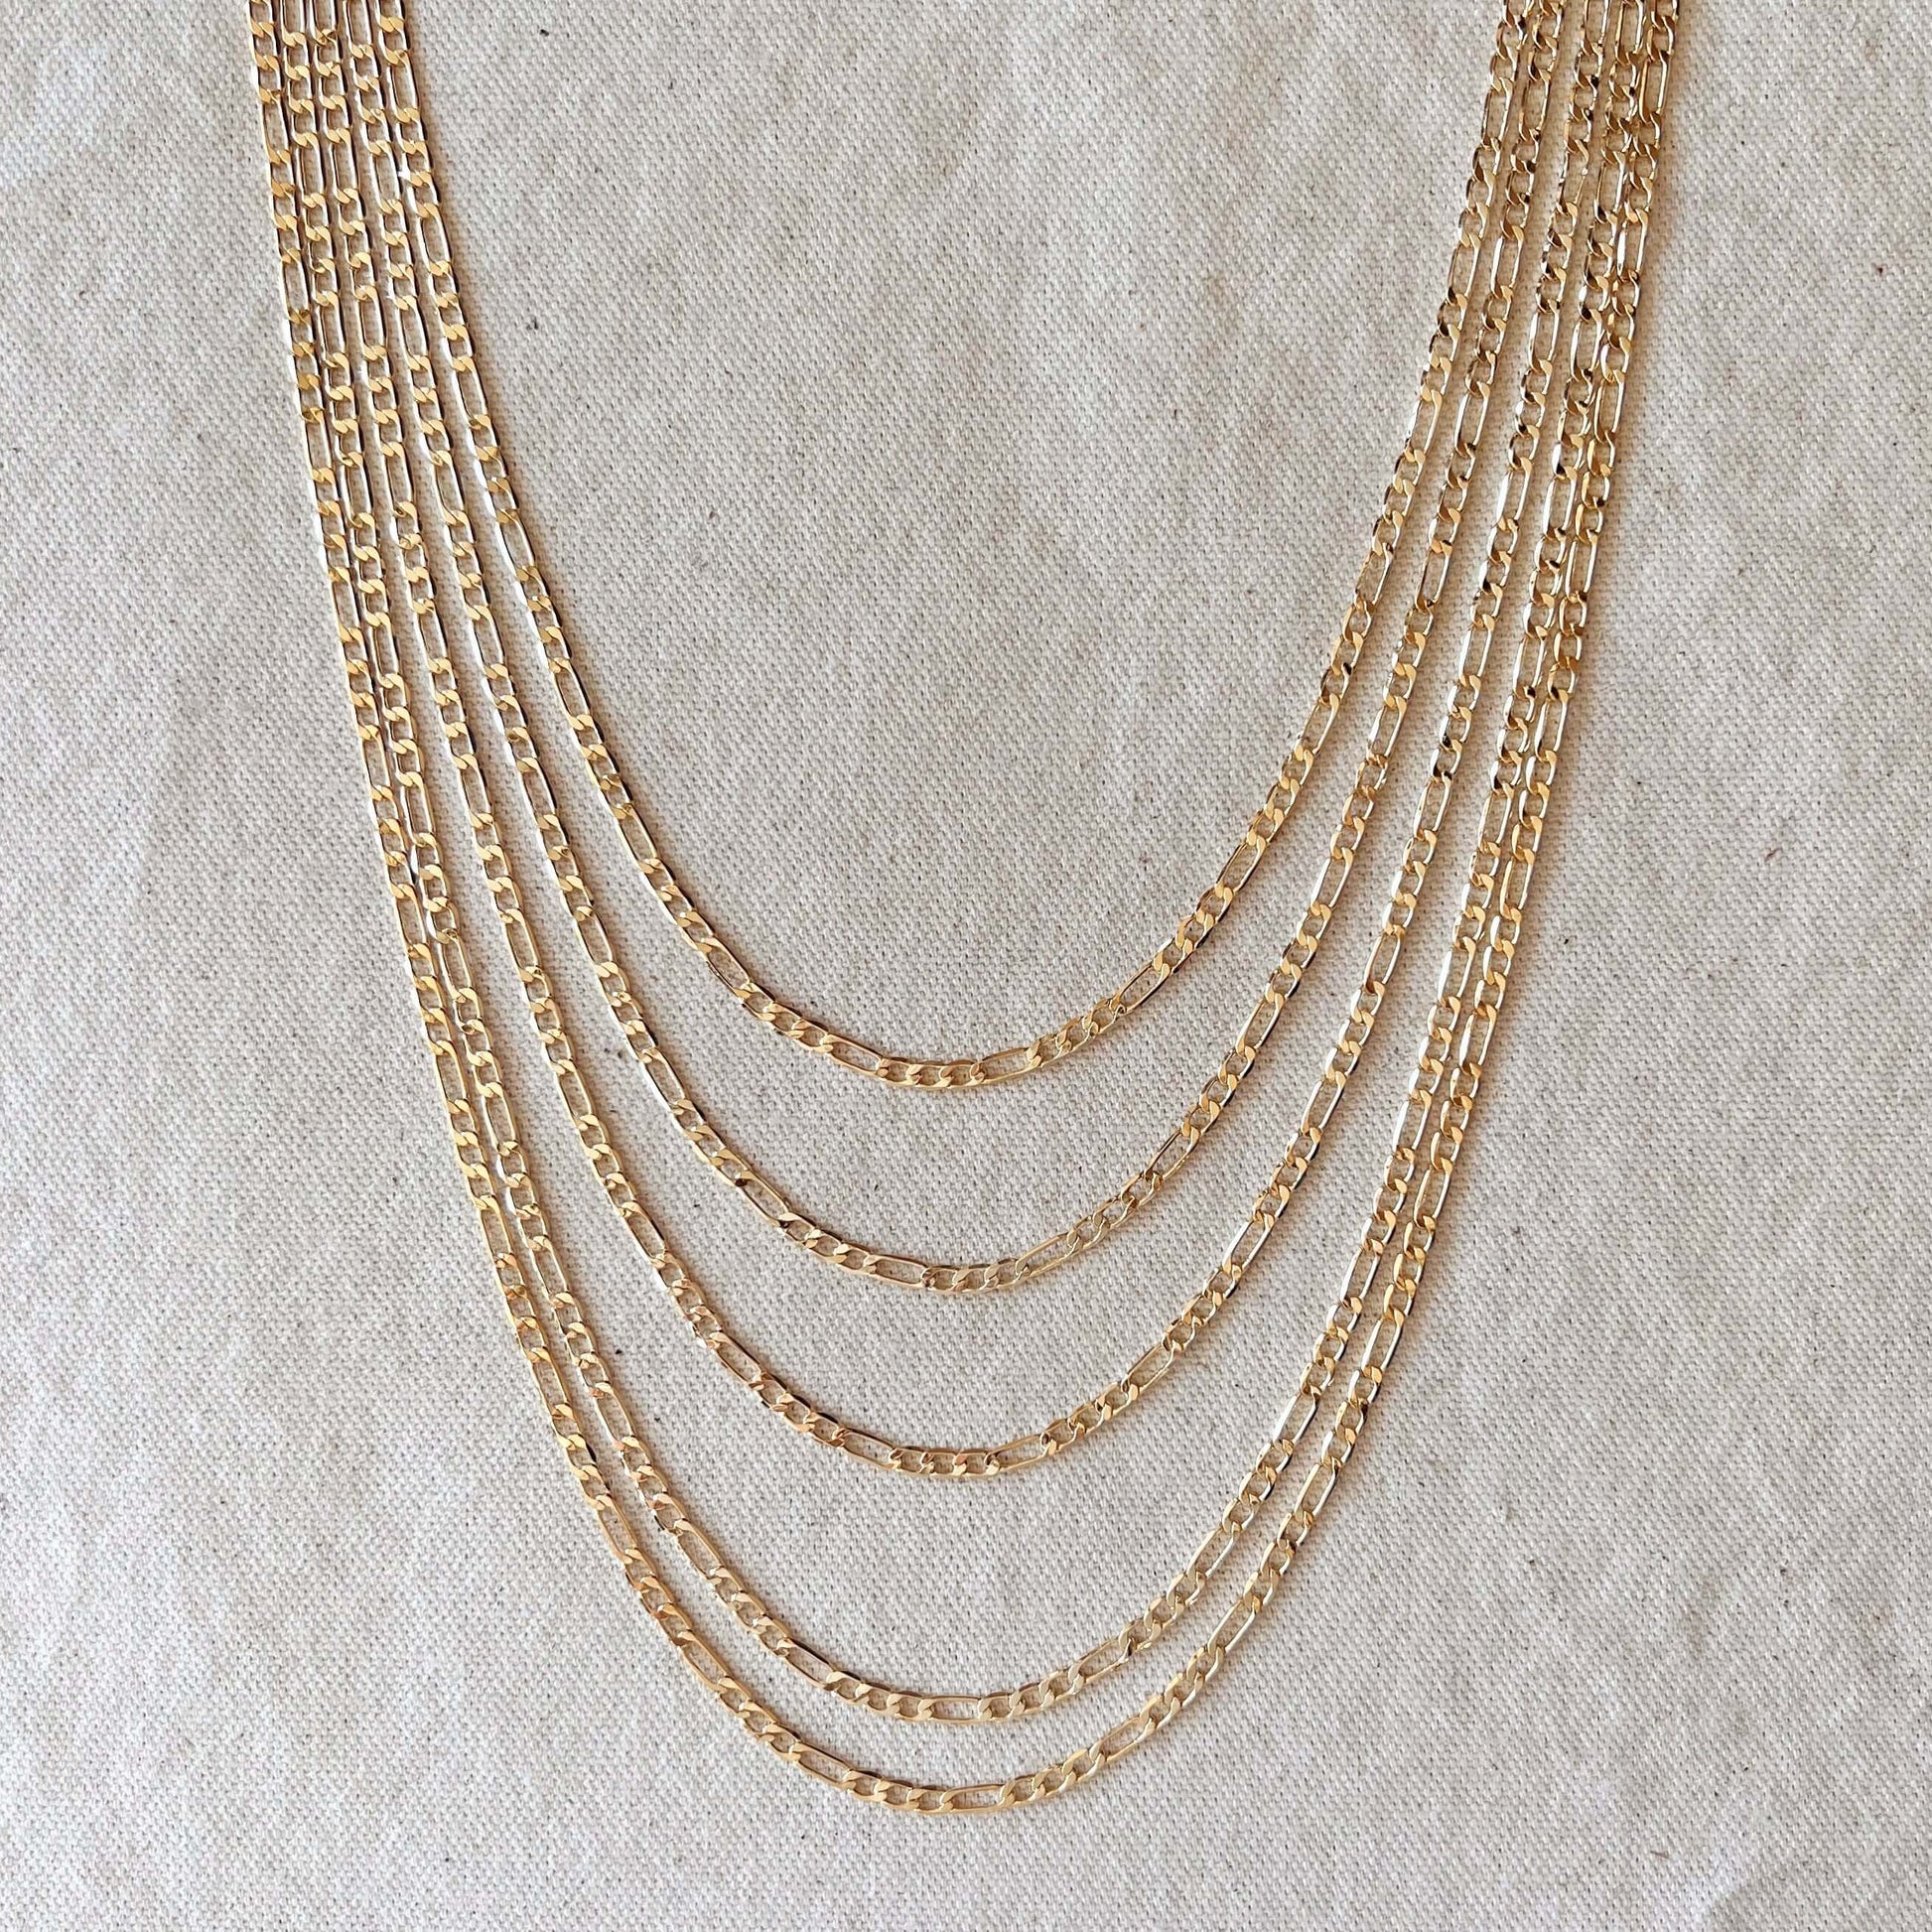 GoldFi 18k Gold Filled Classic Figaro Chain Necklace